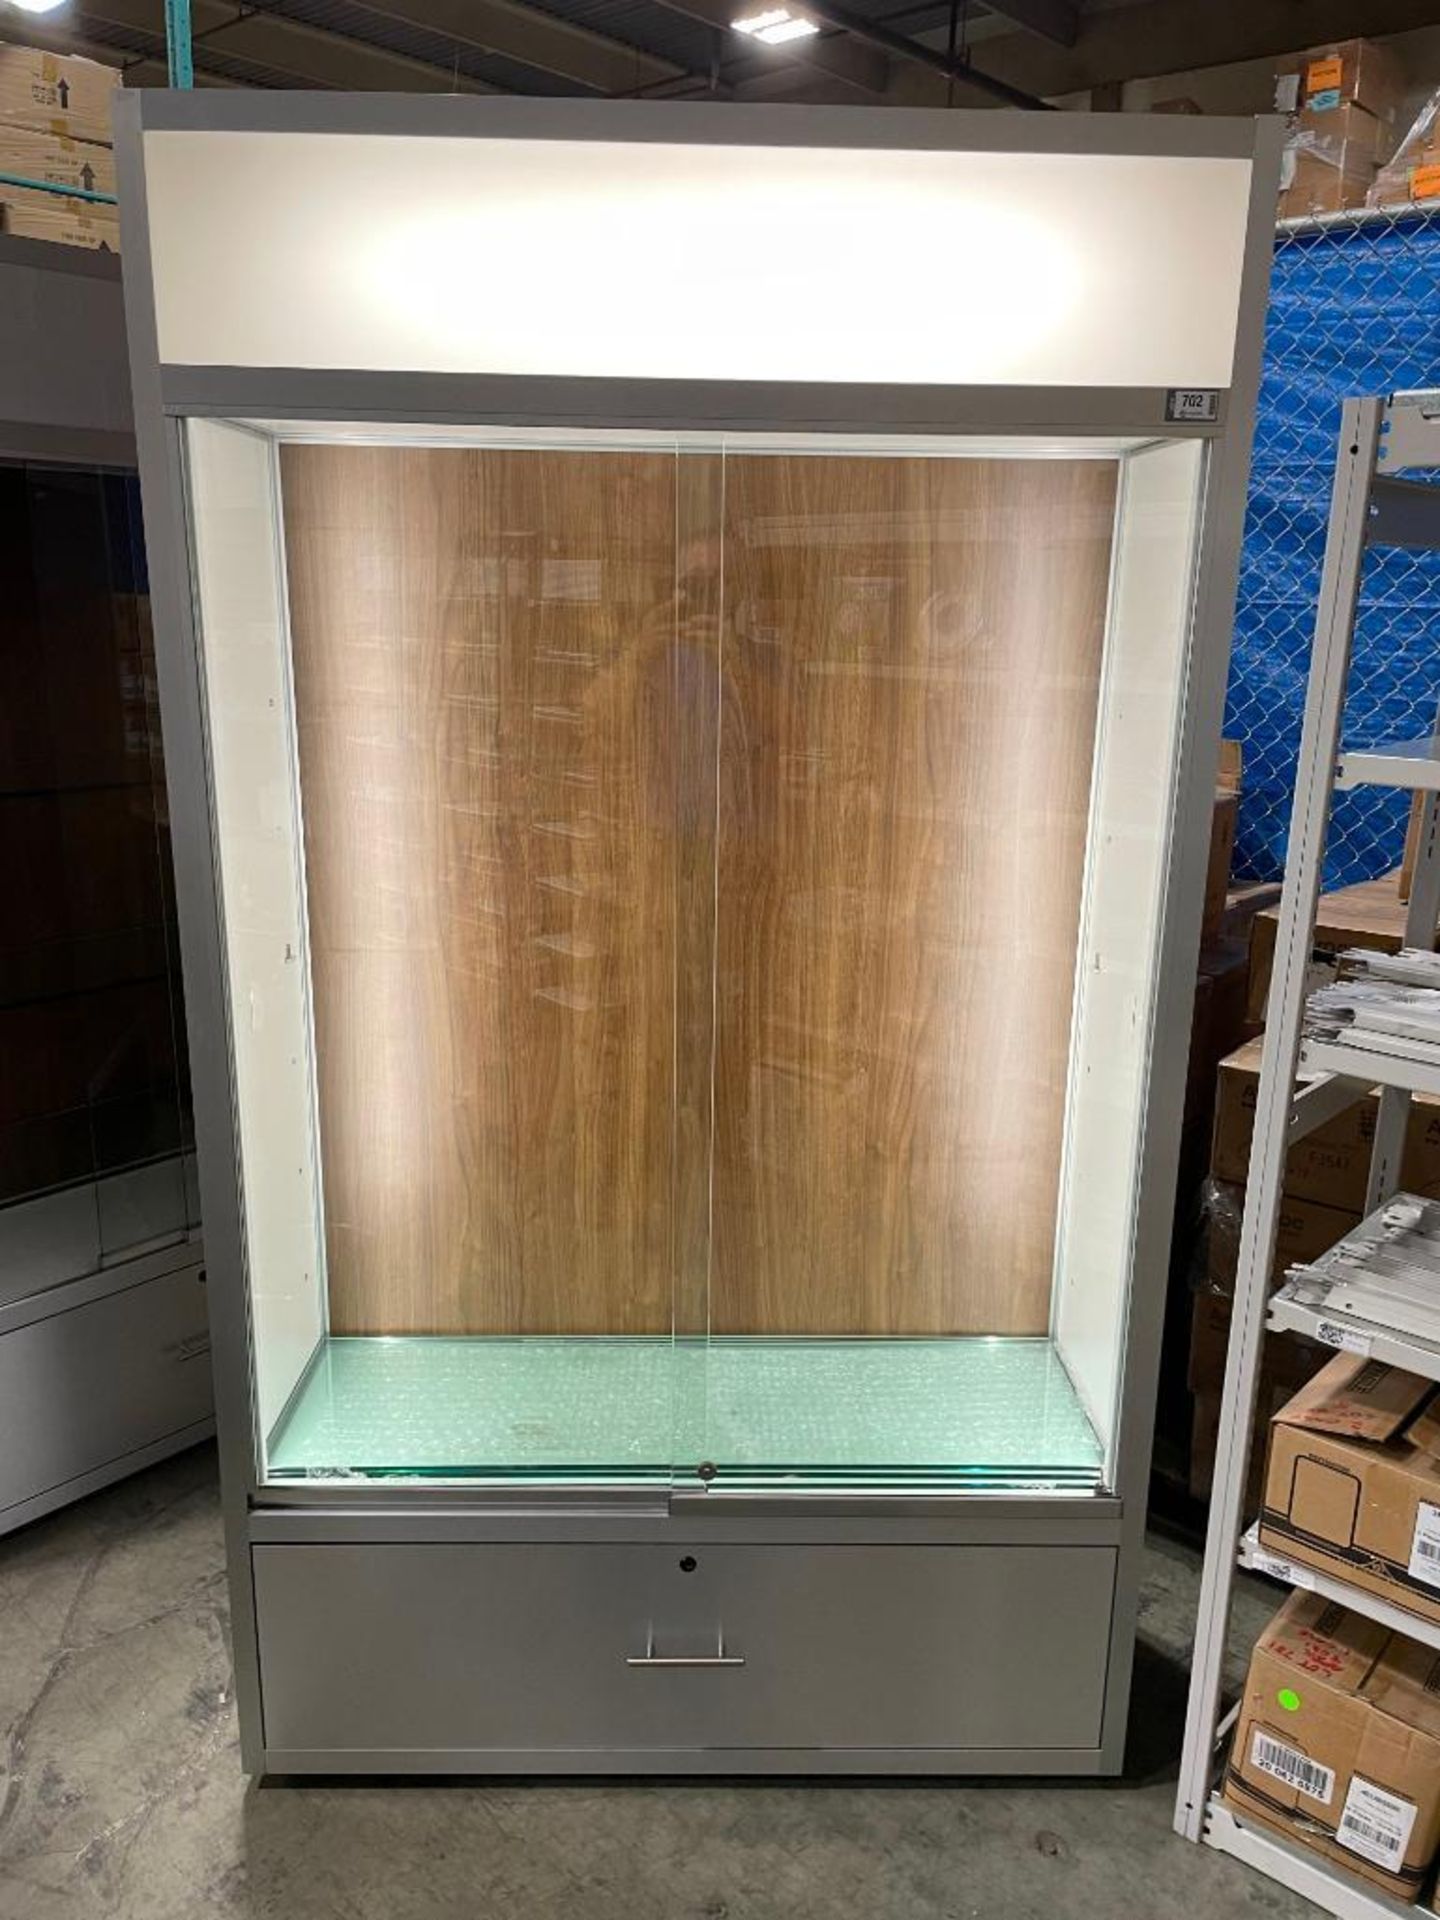 48" GLASS SLIDING DOOR DISPLAY CABINET WITH 1-DRAWER AND LIGHTING - Image 5 of 8